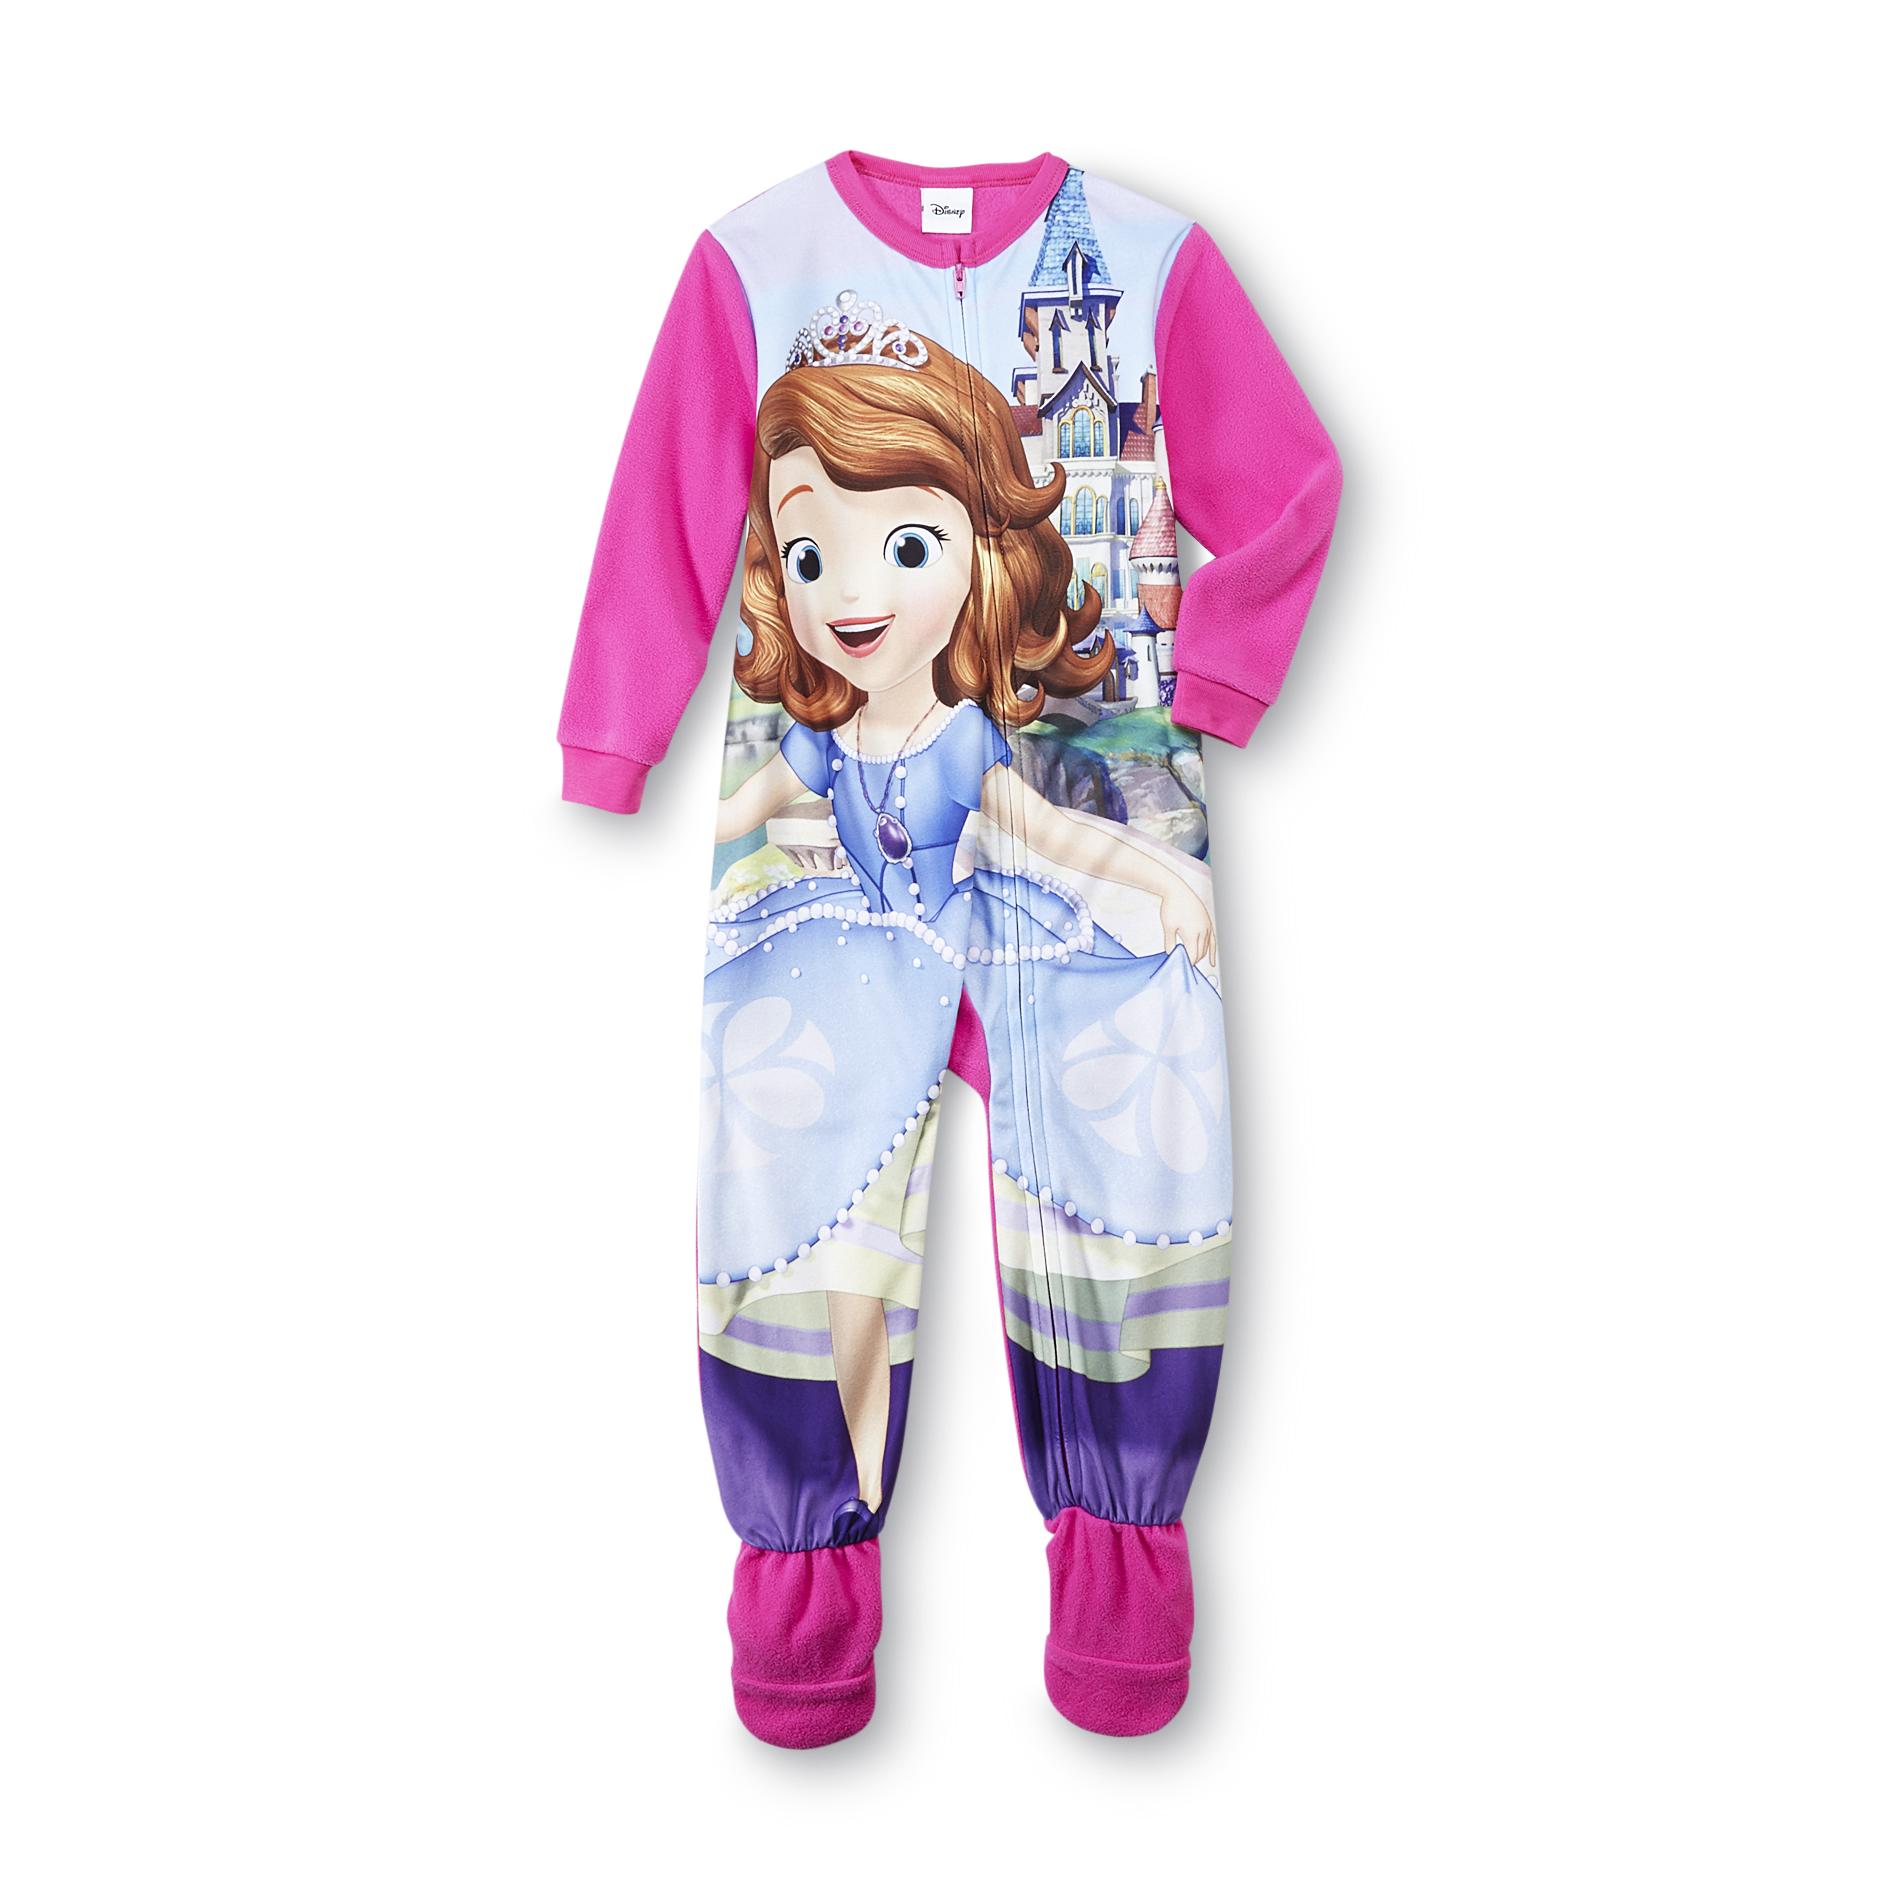 Disney Sofia the First Infant & Toddler Girl's Fleece Footed Pajamas